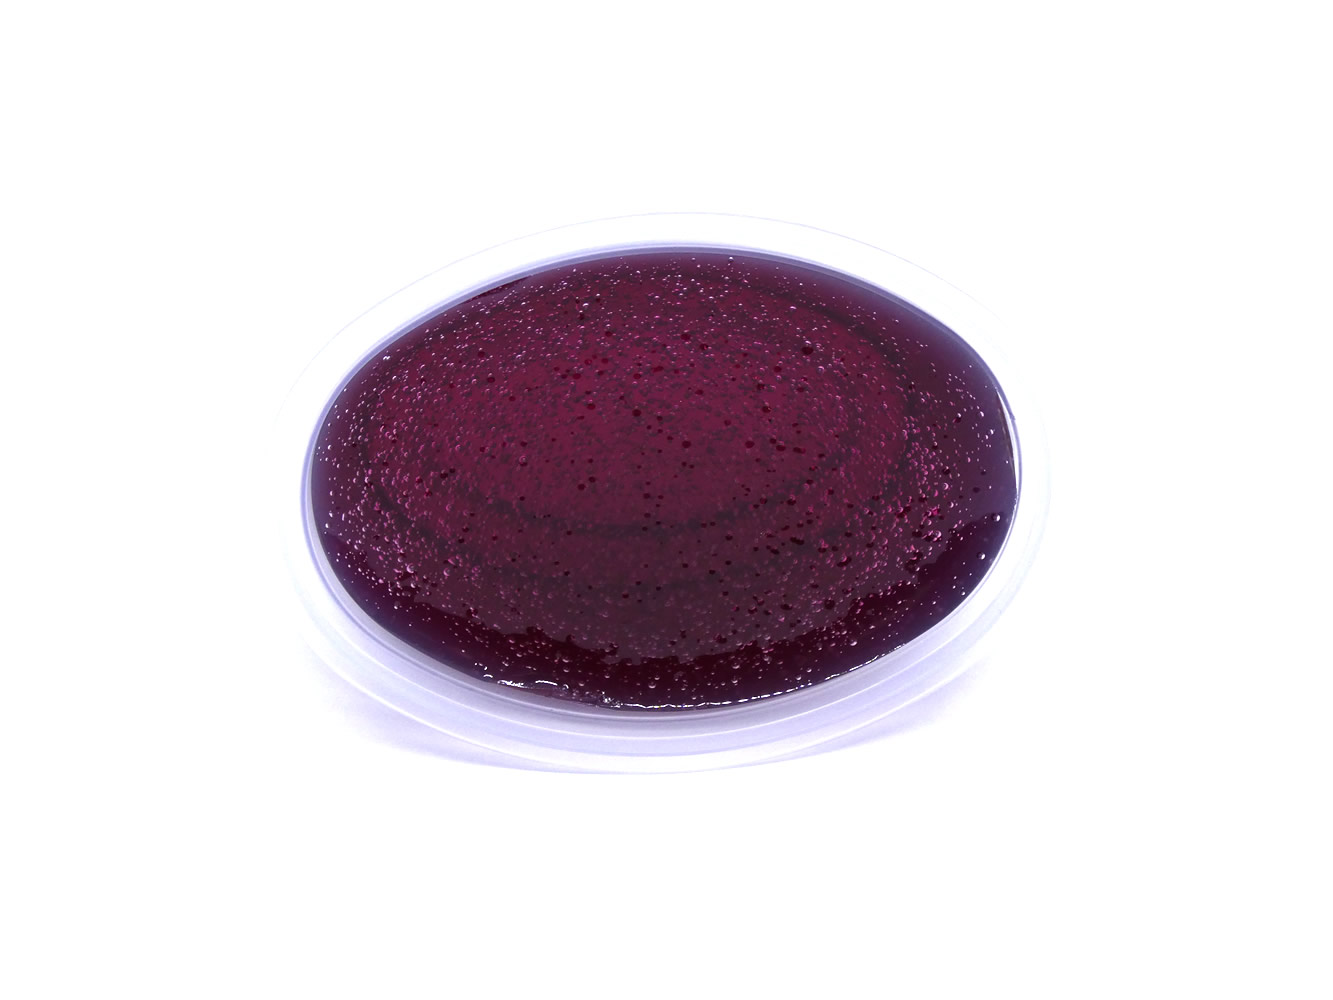 Black Raspberry Vanilla Inspired Gel Melts™ for warmers - 3 pack - Click Image to Close